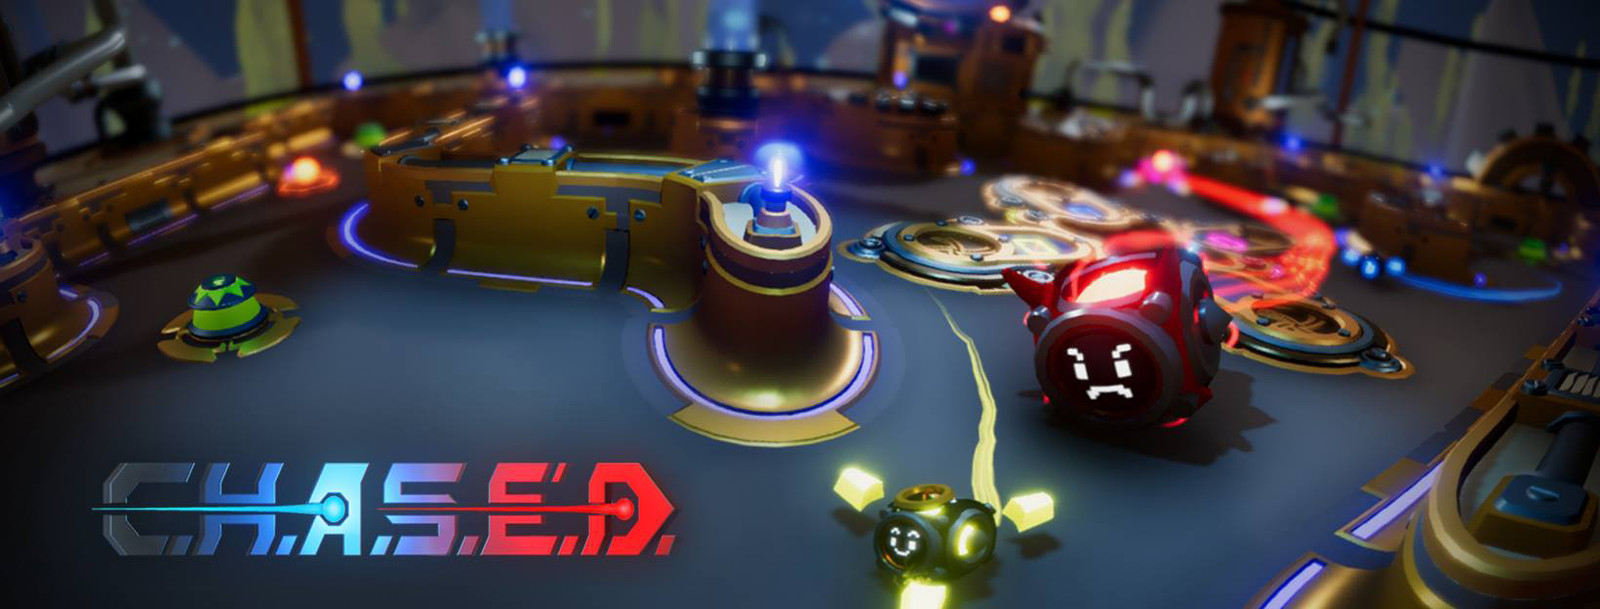 C.H.A.S.E.D. Demo is playable and downloadable on :
- https://gamejolt.com/games/FrostyFroggsCHASED/292632
- https://frostyfroggs.itch.io/chased